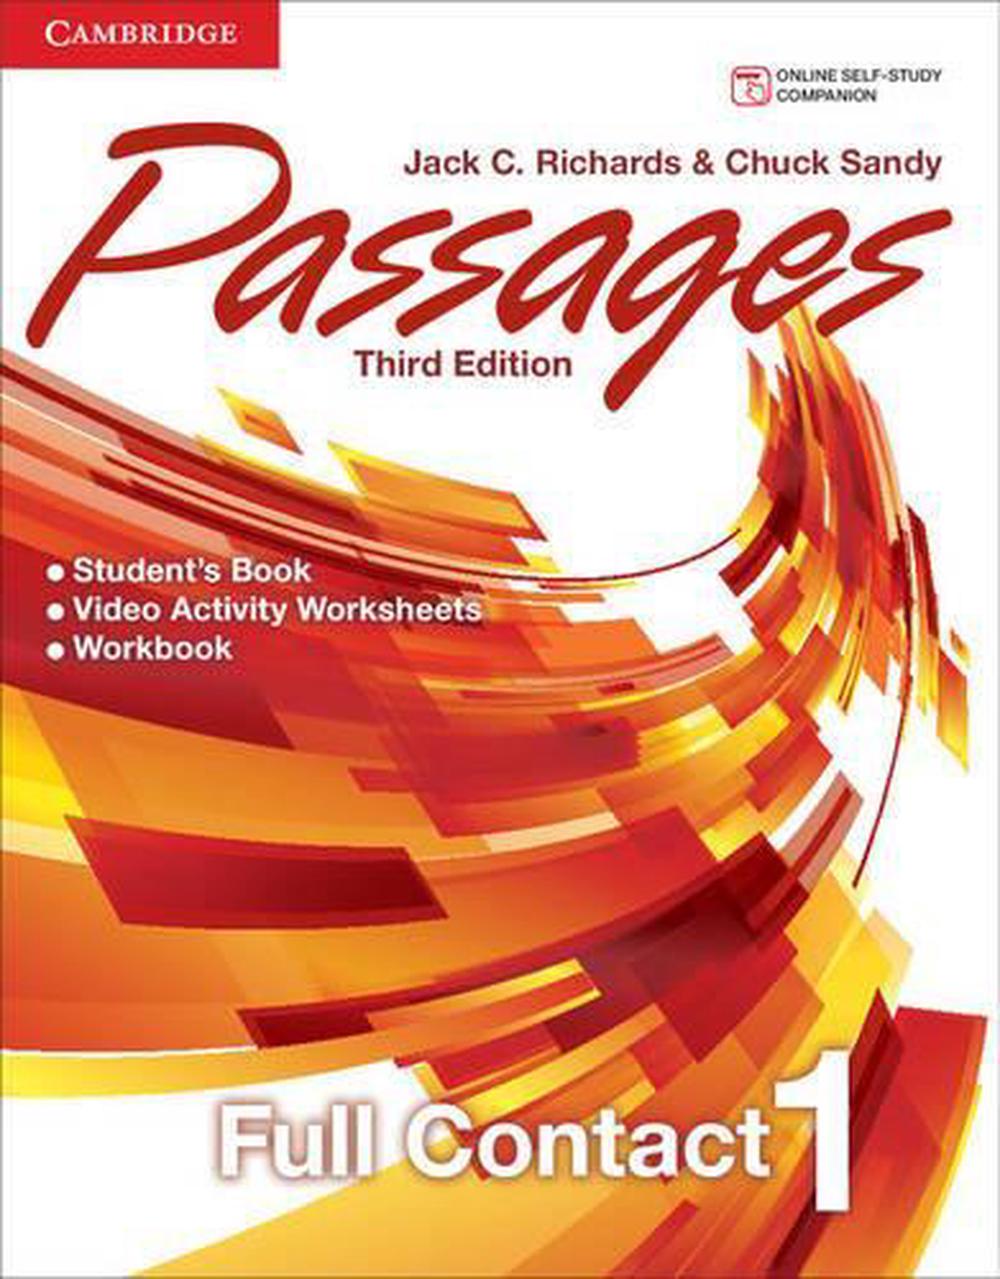 Passages Level 1 Full Contact by Jack C. Richards (English) Paperback